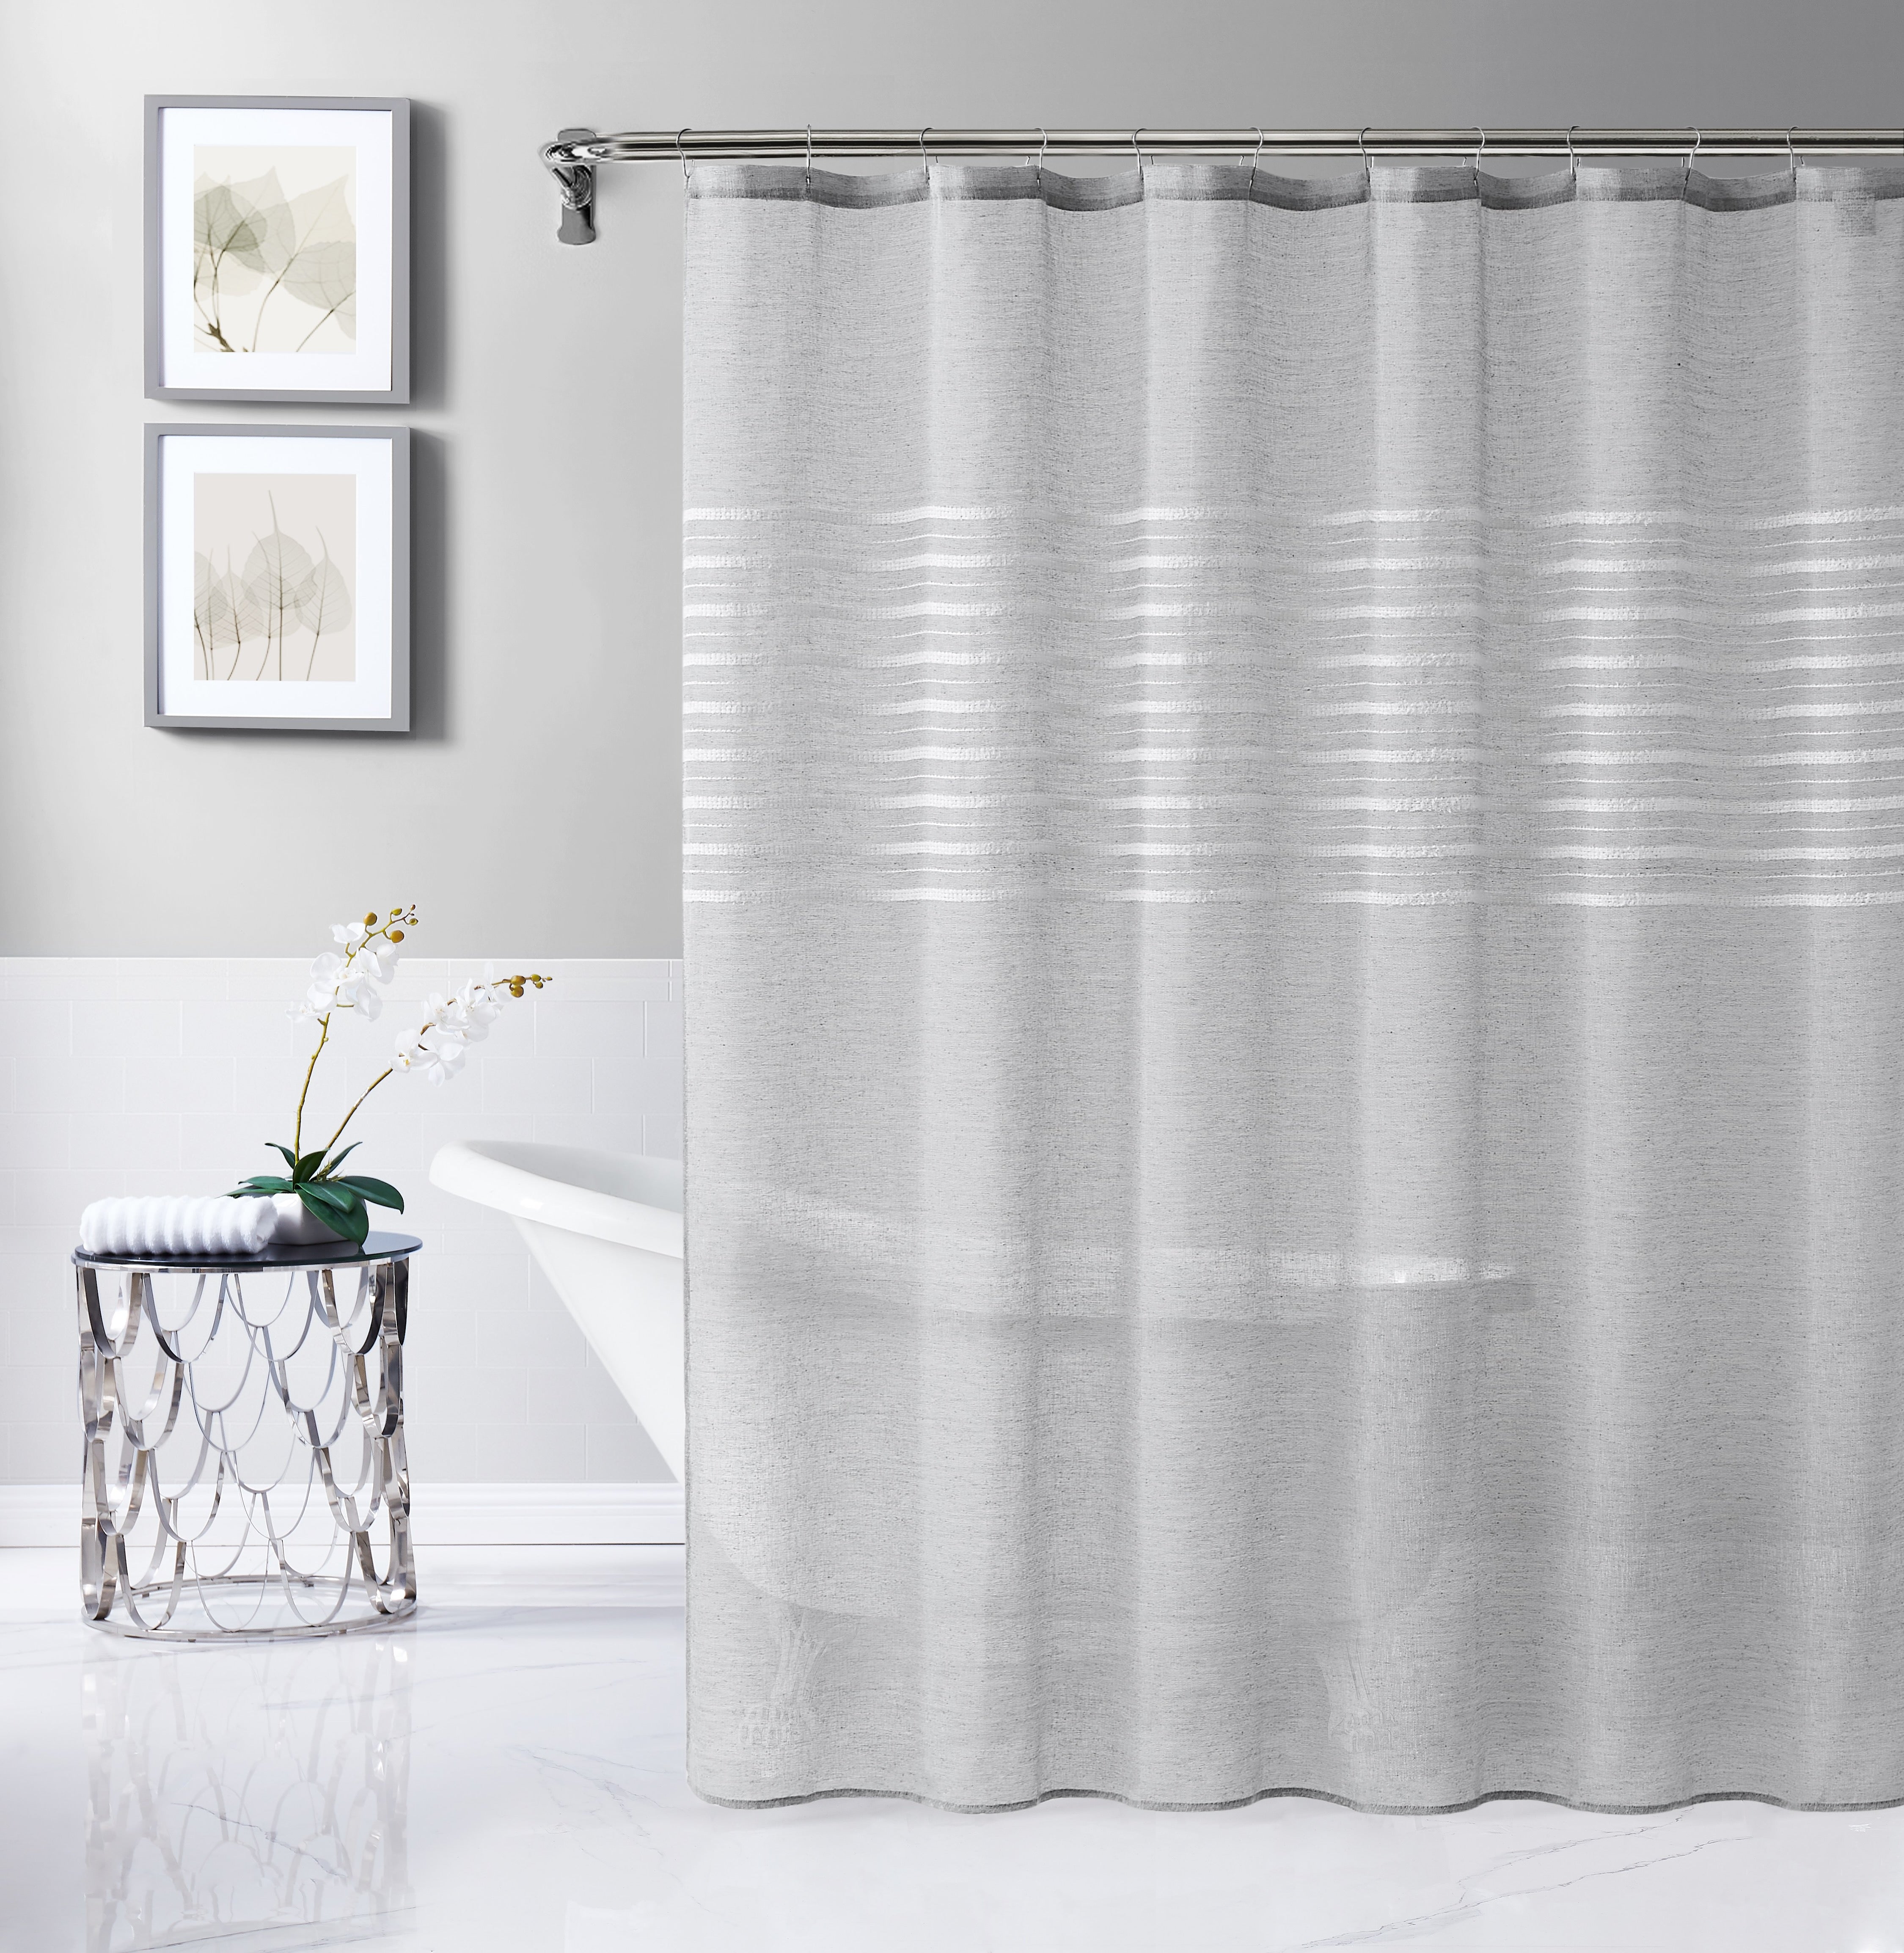 Dainty Home Daniella 3D Solid Linen Look Textured Striped 3D Chenille Designed Fabric Shower Curtain